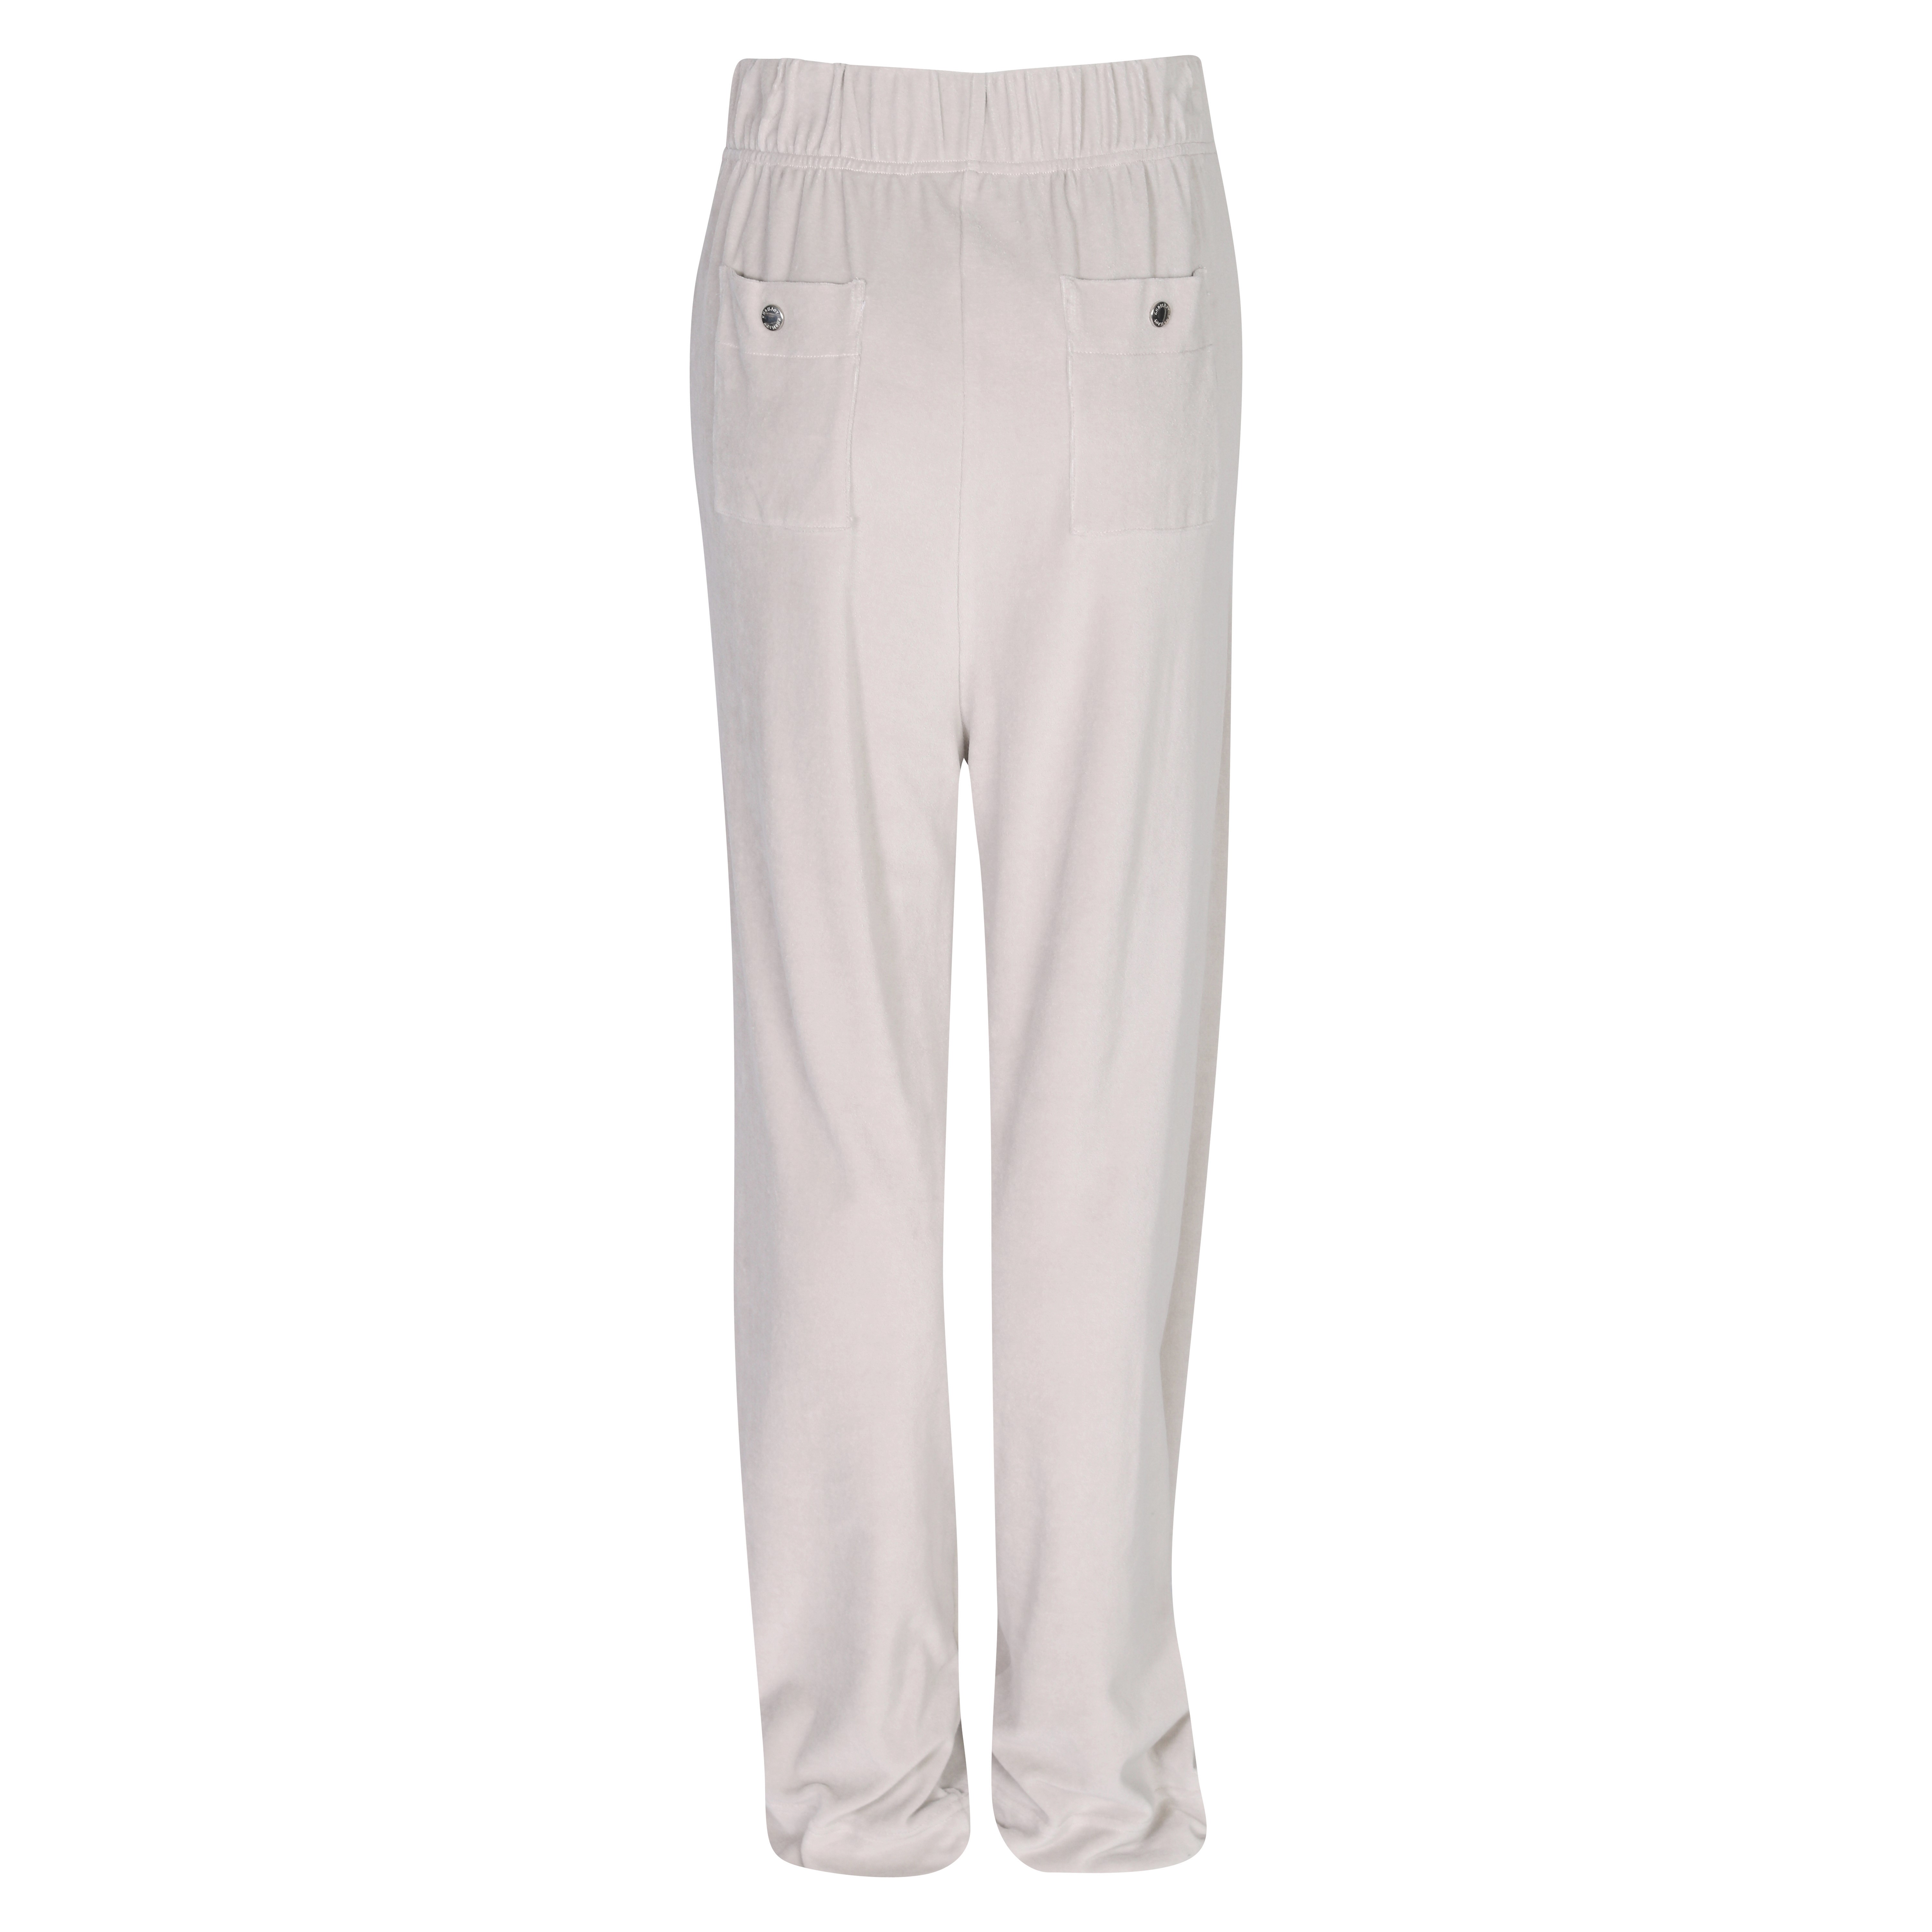 Khrisjoy Velour Tracksuit Pant in Oyster Grey